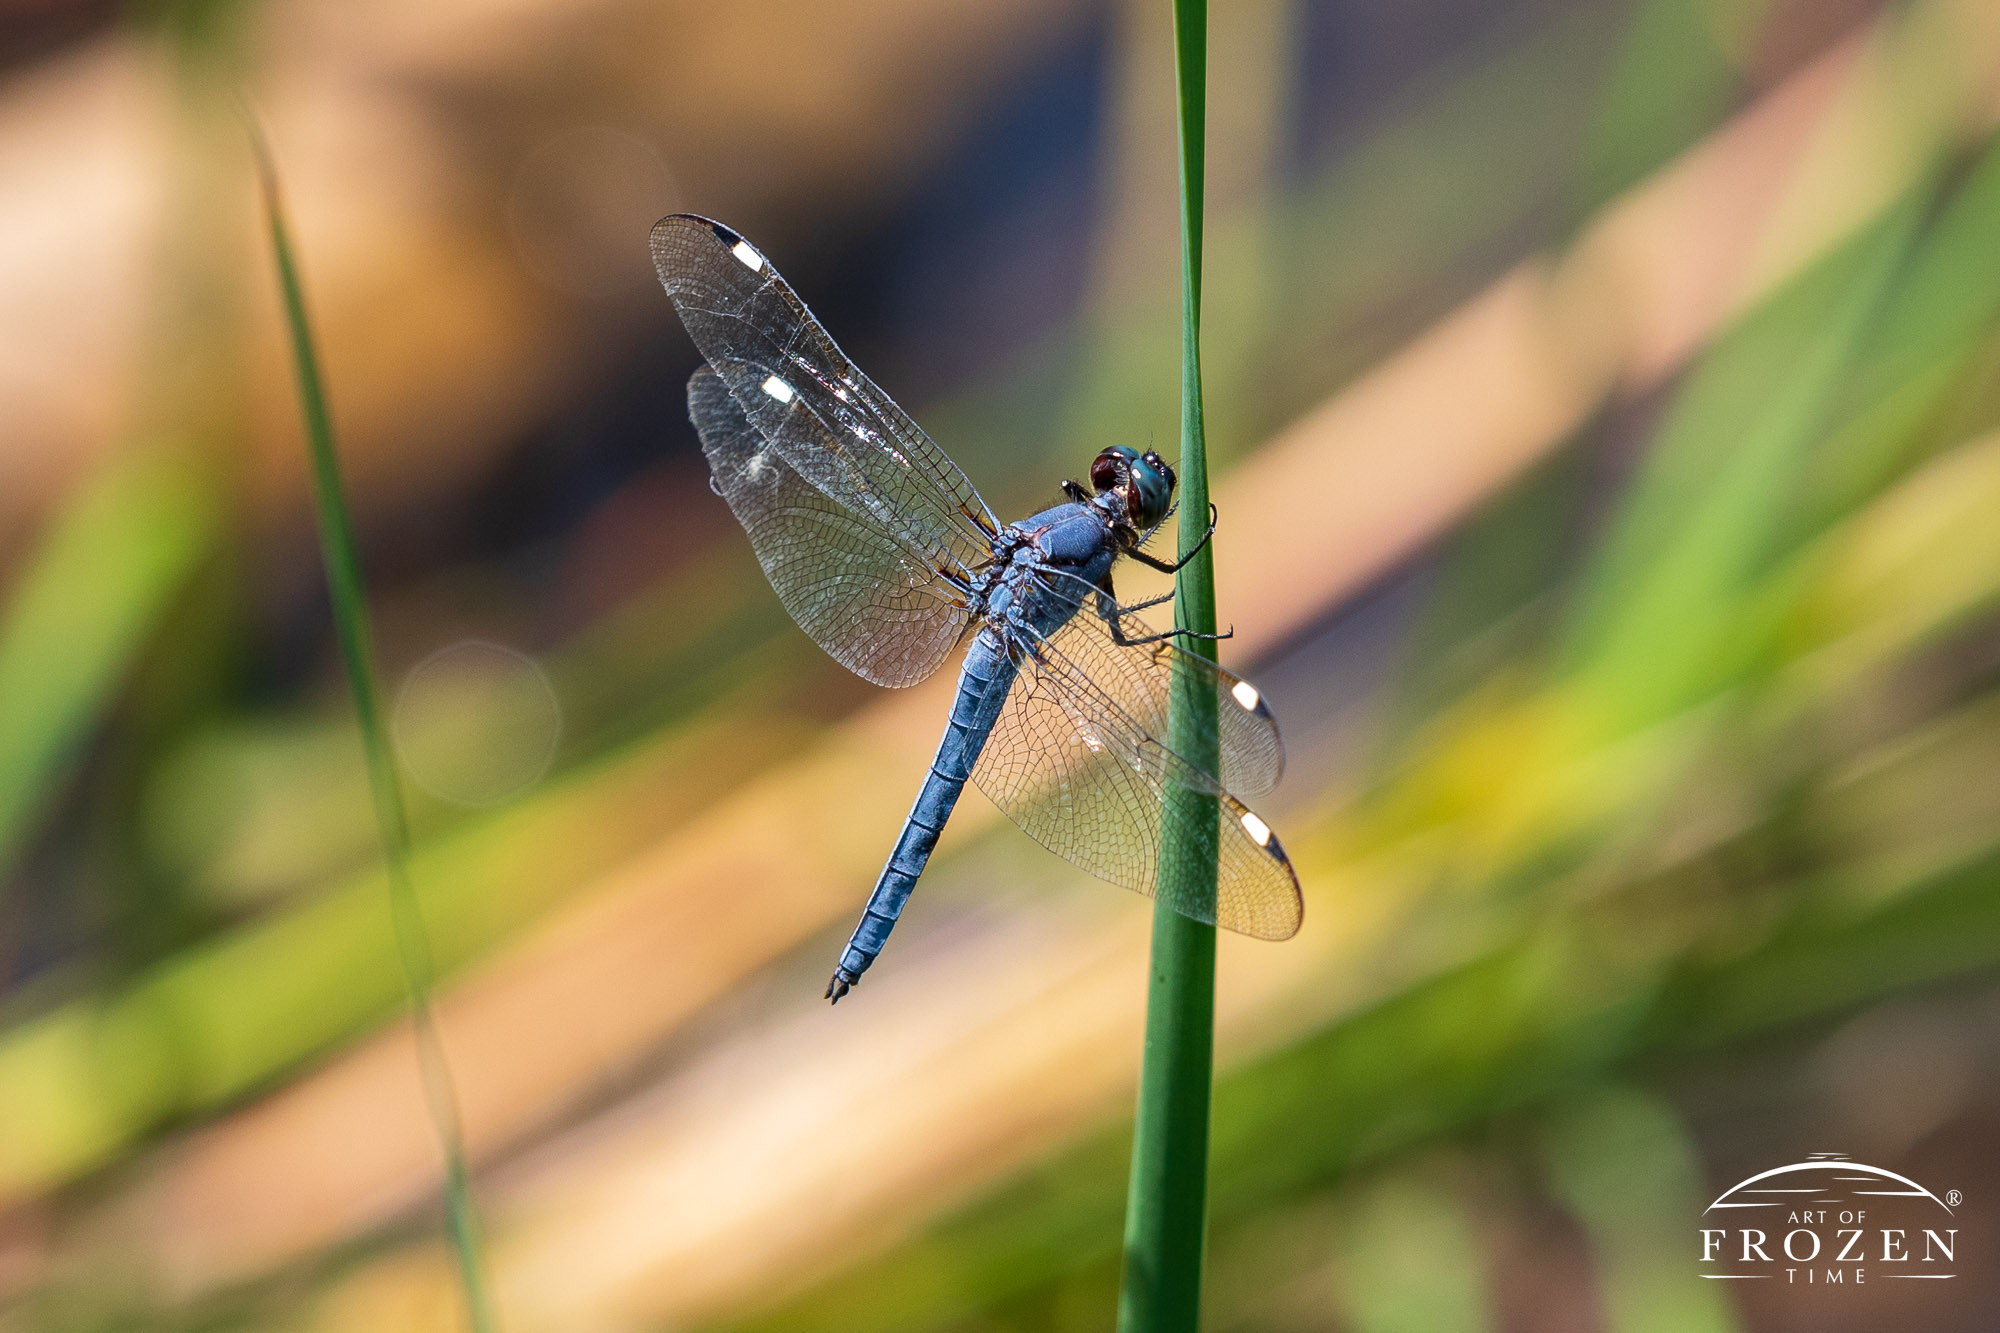 A side view of an Eastern Pondhawk Dragronfly with its blue abdomen